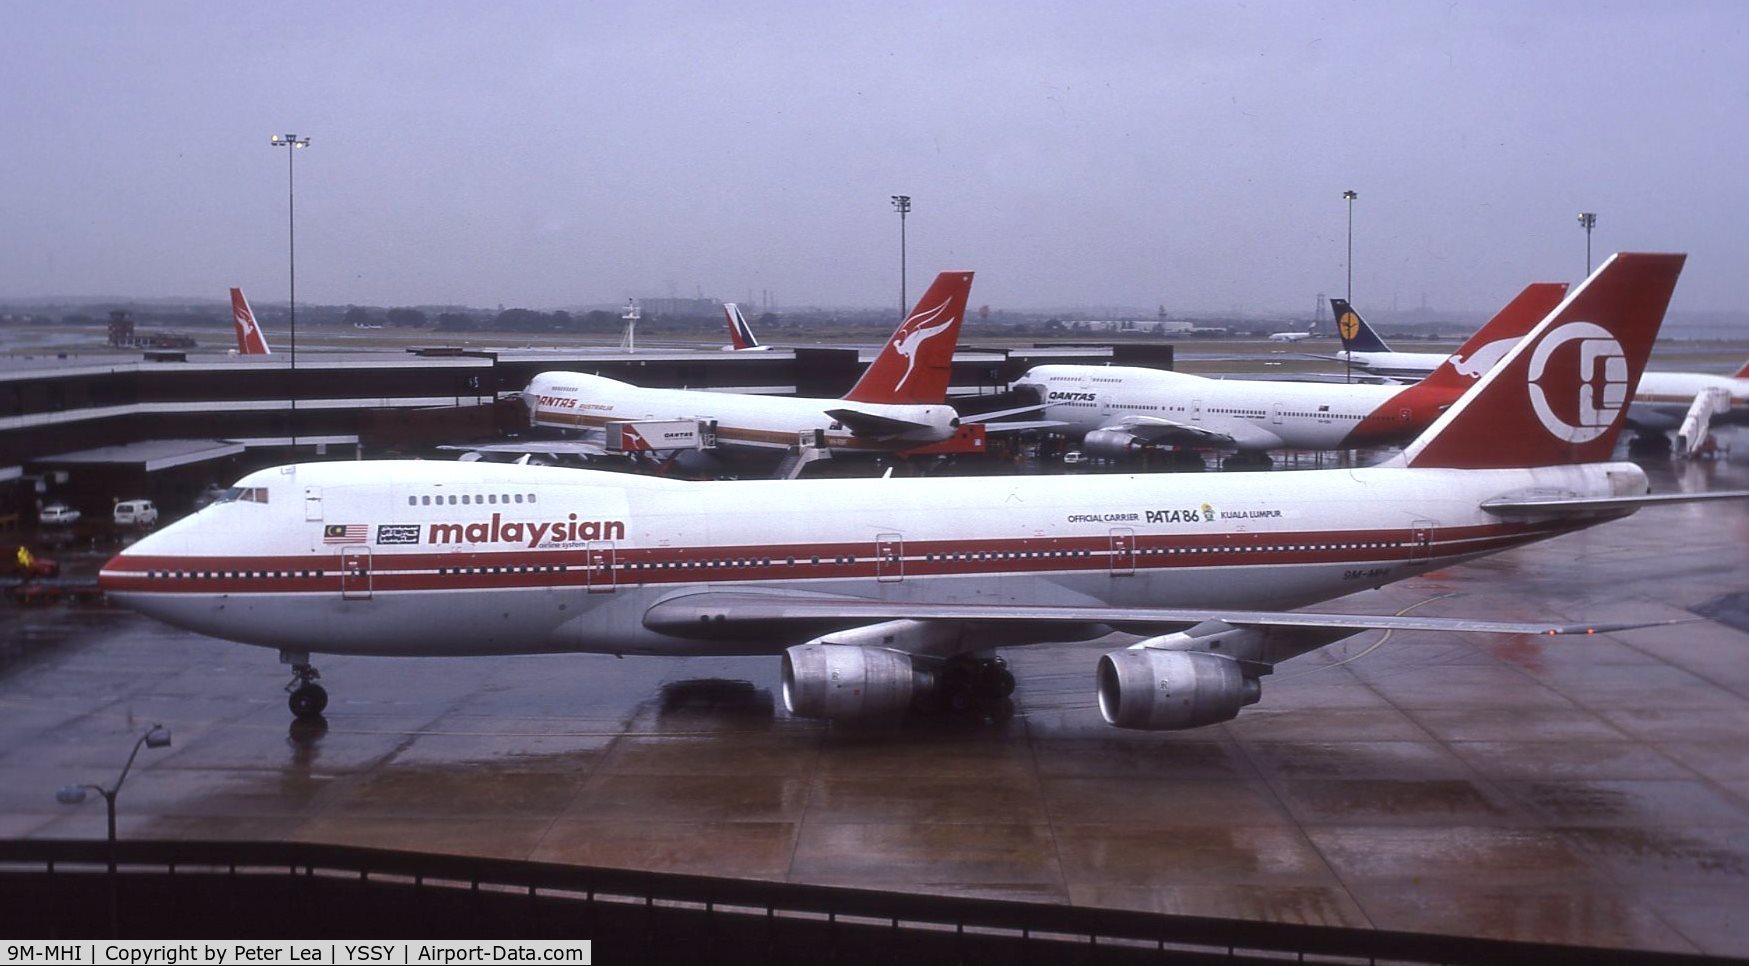 9M-MHI, 1981 Boeing 747-236B C/N 22304, Malaysian Airlines Boeing 747-236B at Sydney Airport during 1985